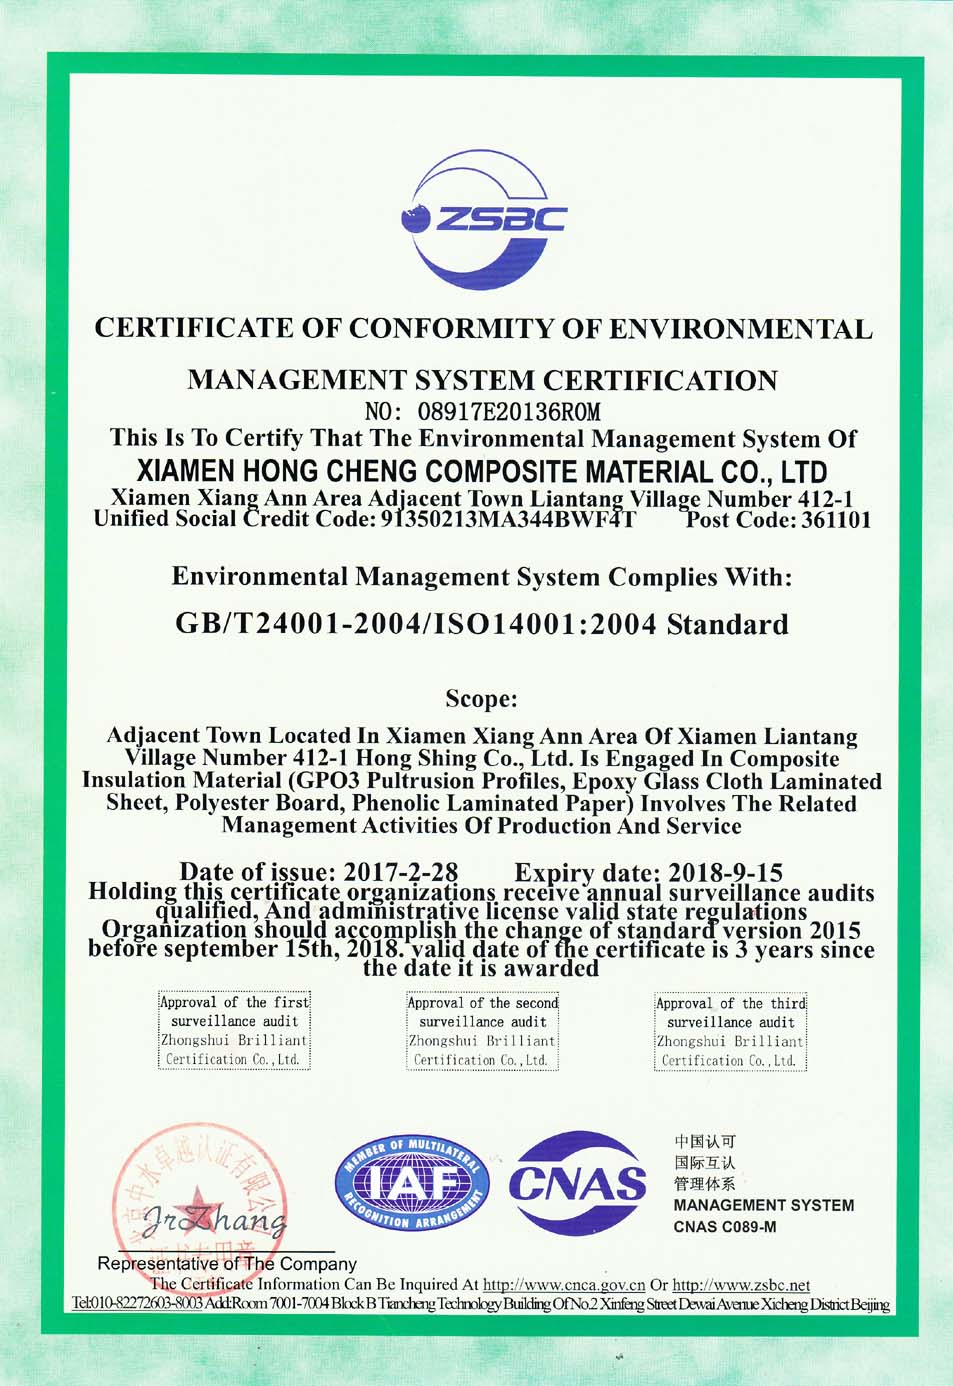  Certificate of conformity and environmental management system certification